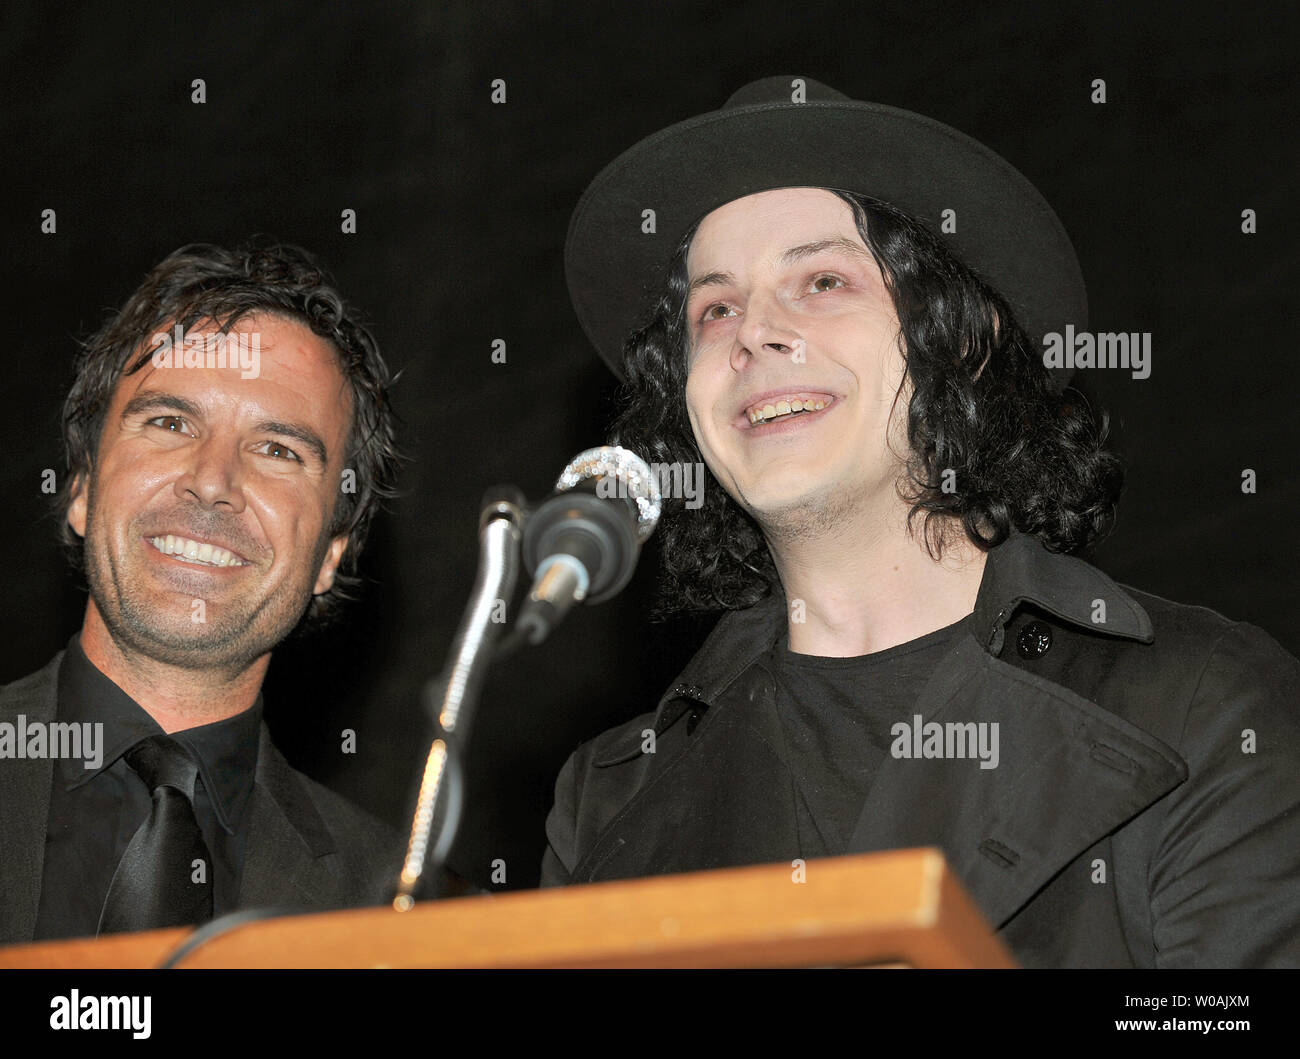 White Stripes' Jack White (R) and director Emmett Malloy greet the audience before the world premiere screening of the documentary 'The White Stripes: Under Great White Northern Lights' during the Toronto International Film Festival at the Elgin Theater in Toronto, Canada on September 18, 2009.  UPI /Christine Chew Stock Photo